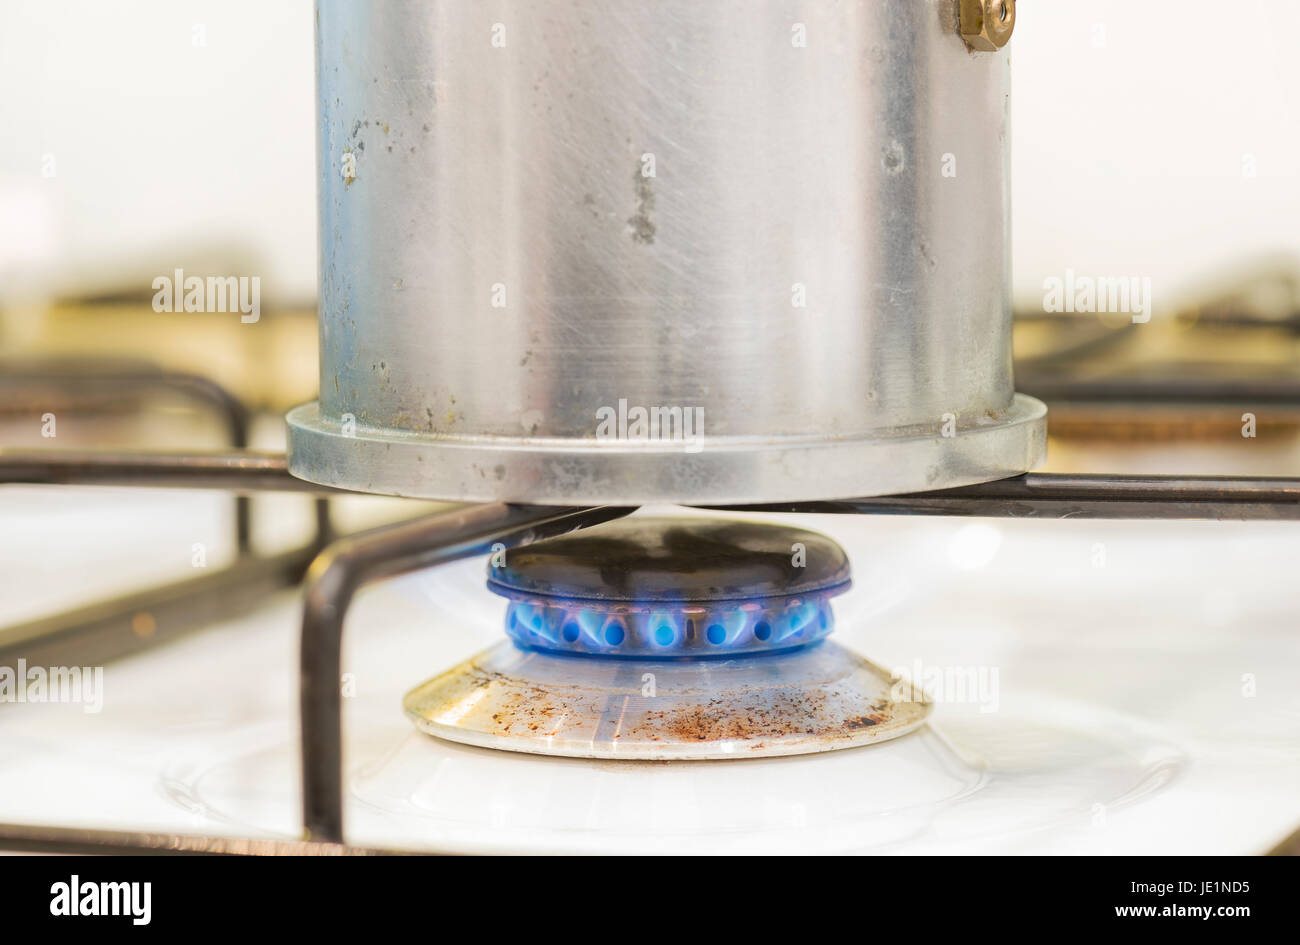 coffee pot on the stove with fire Stock Photo